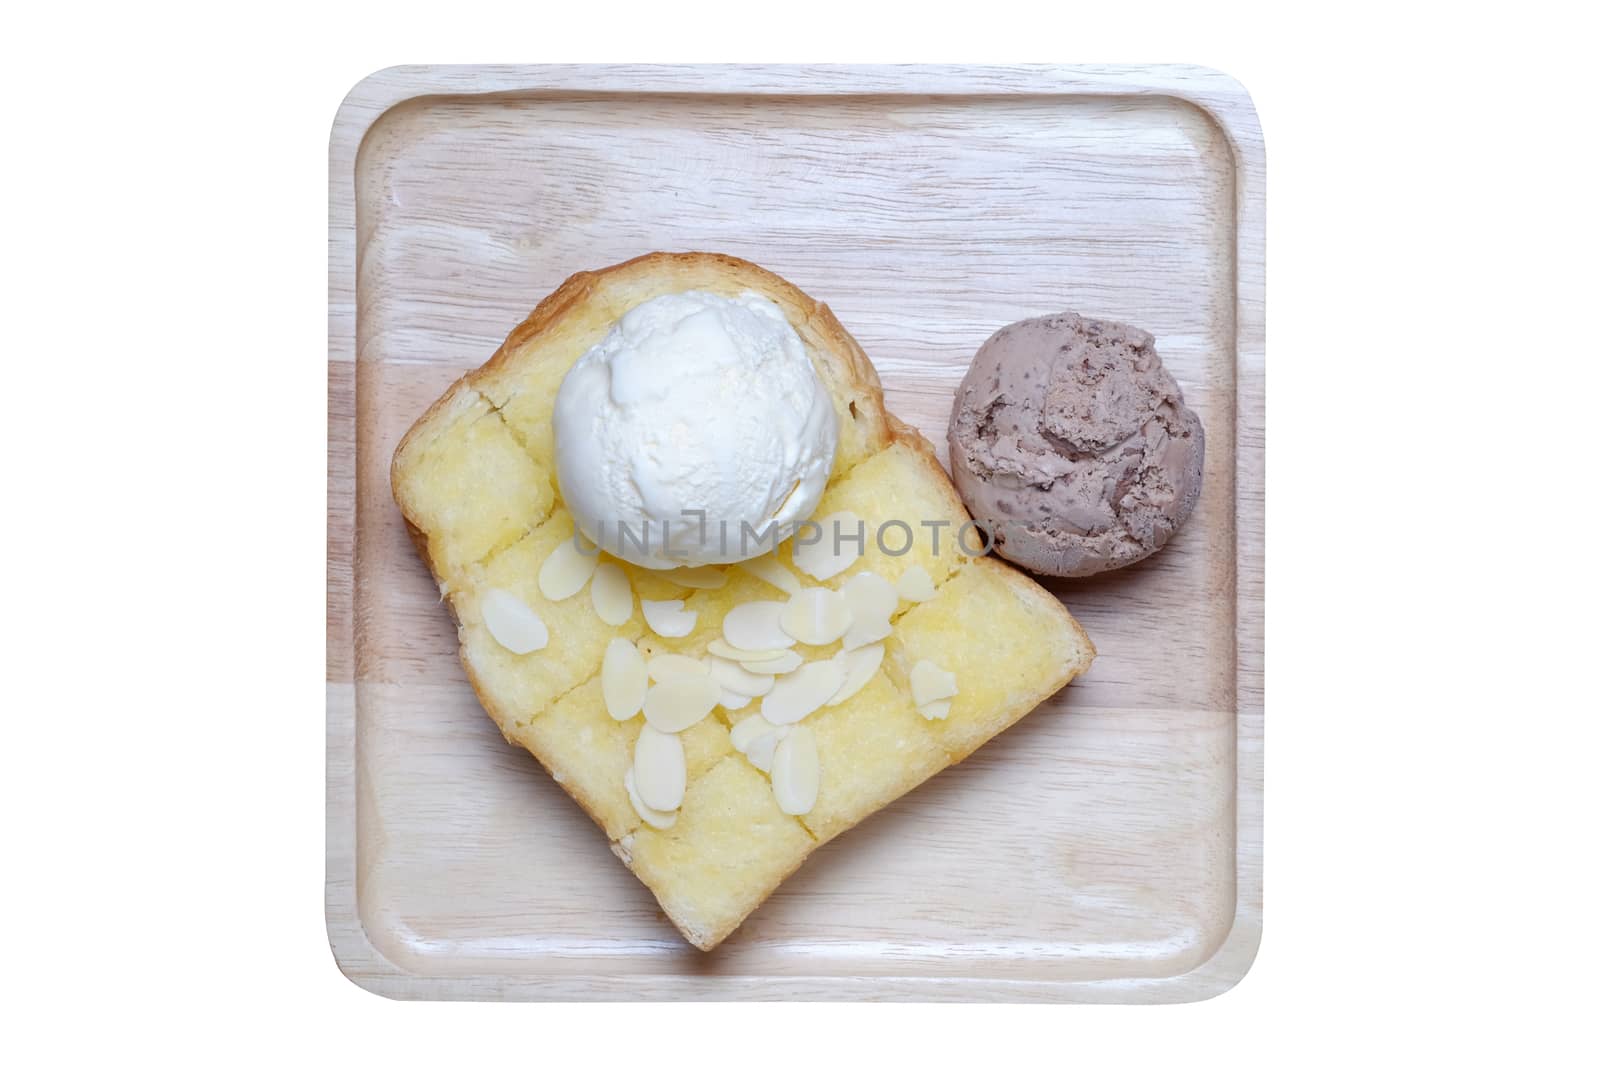 ice creams and almond slice on toast, all put on wooden plate in white isolate background.